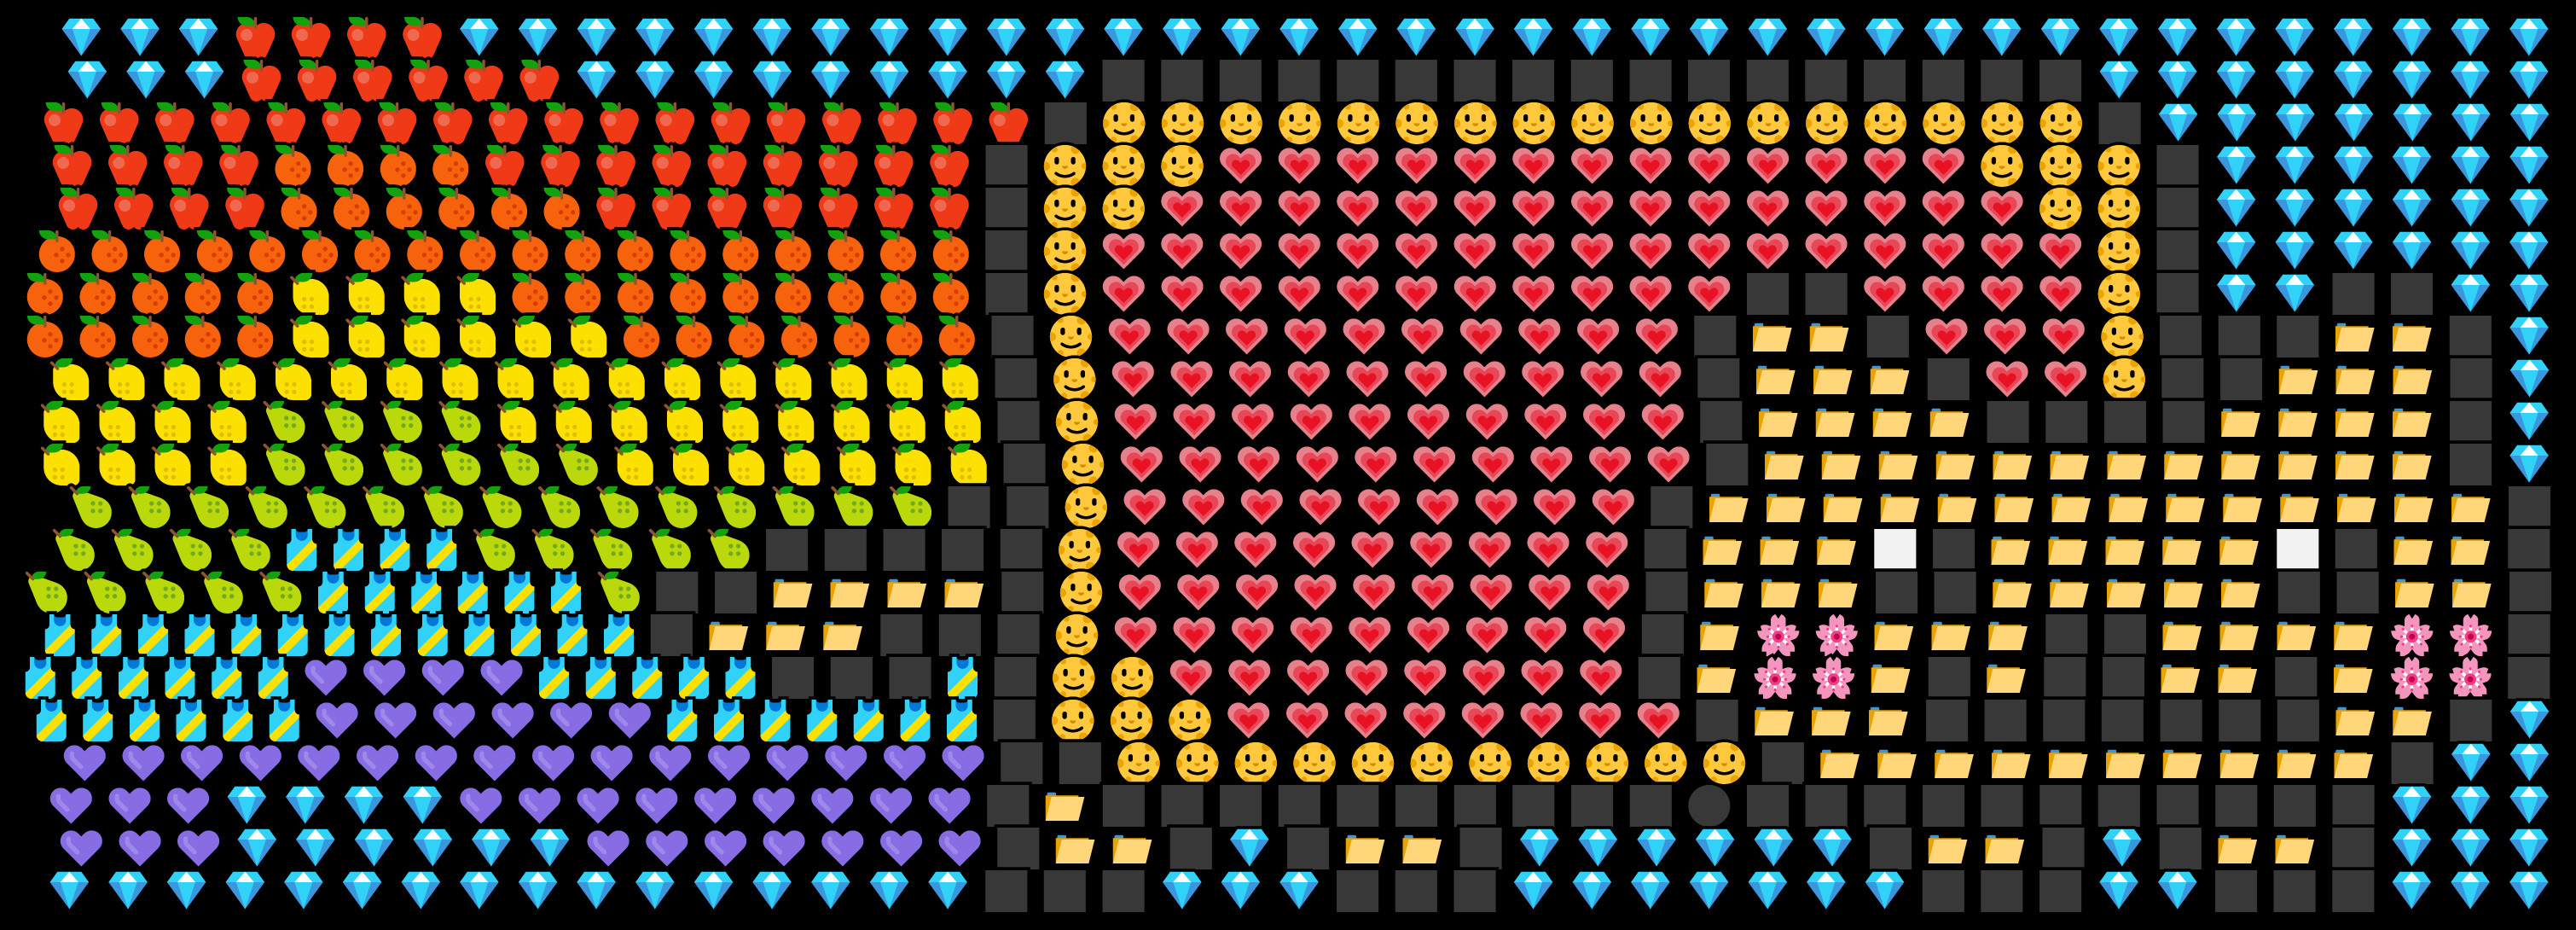 This example draws the well-known Nyan Cat Internet meme from various Unicode emojis. It uses hearts, fruits, gemstones, flowers, and other emoticons as individual colorful pixels. It sets the black color for the background and aligns all emojis to the right side as that's the direction where the cat is flying.